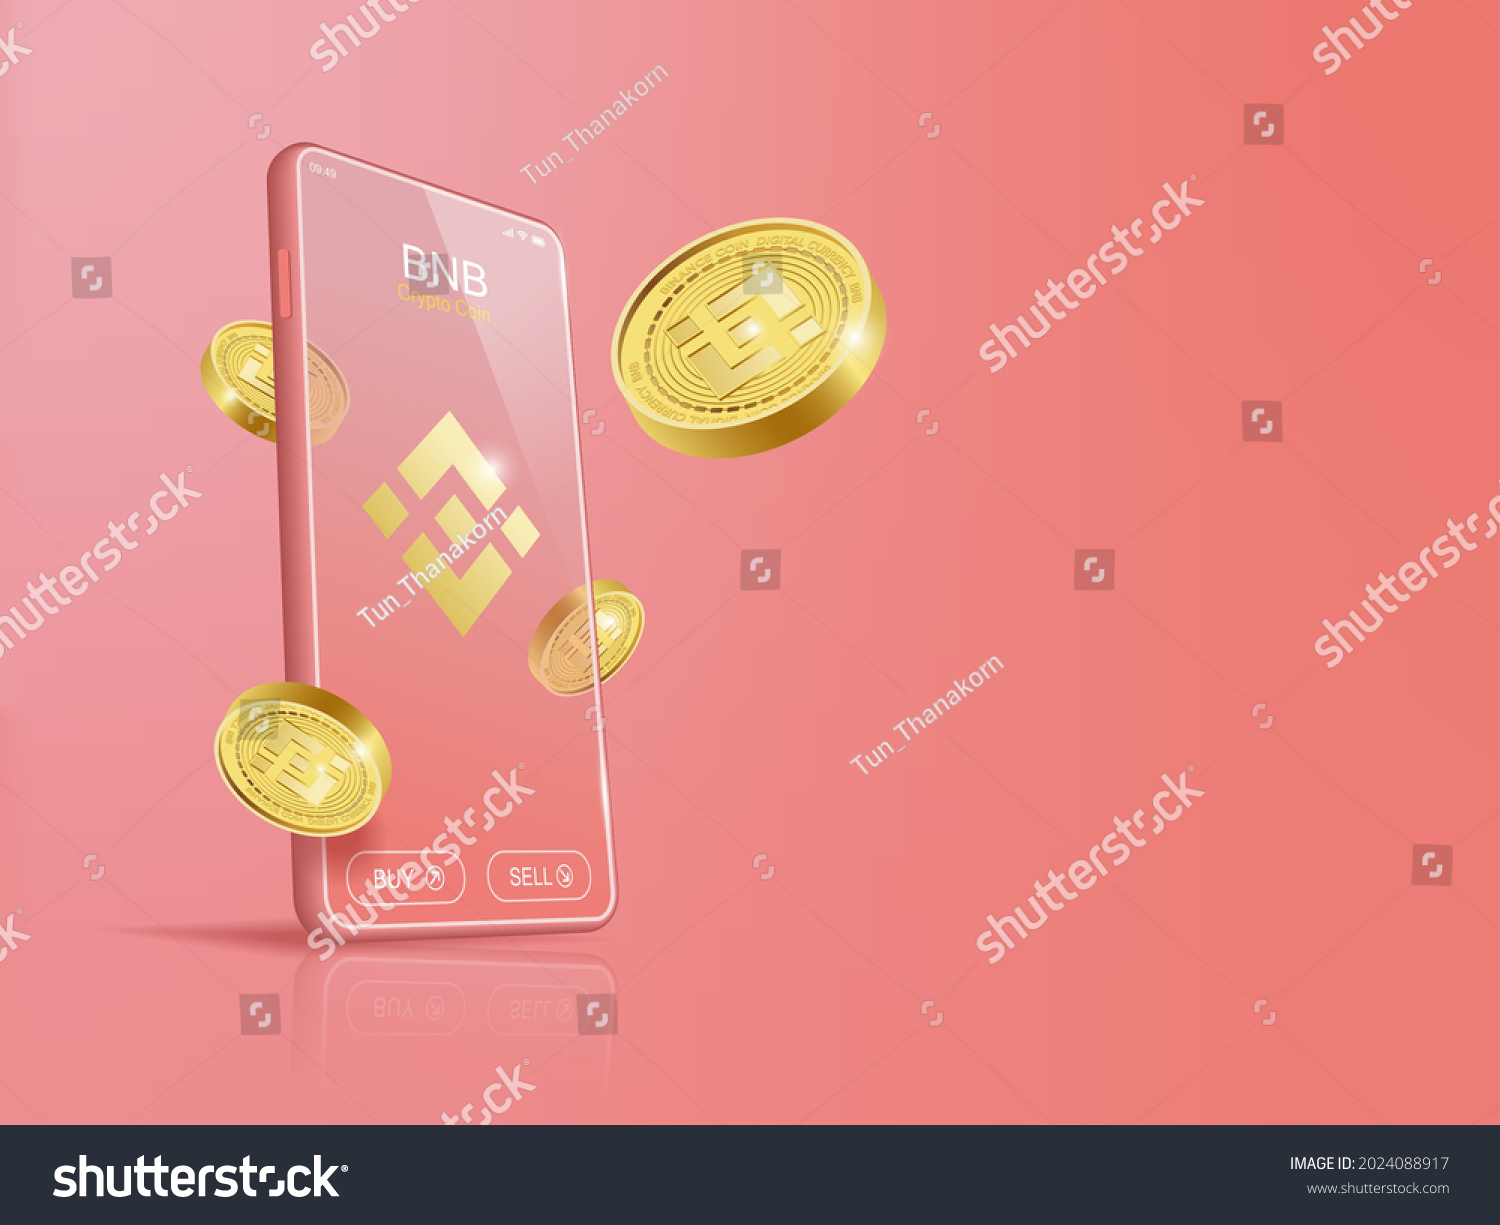 SVG of Trade Binance (BNB) on mobile through the system Cryptocurrency. Perspective Illustration about Crypto Coins. svg